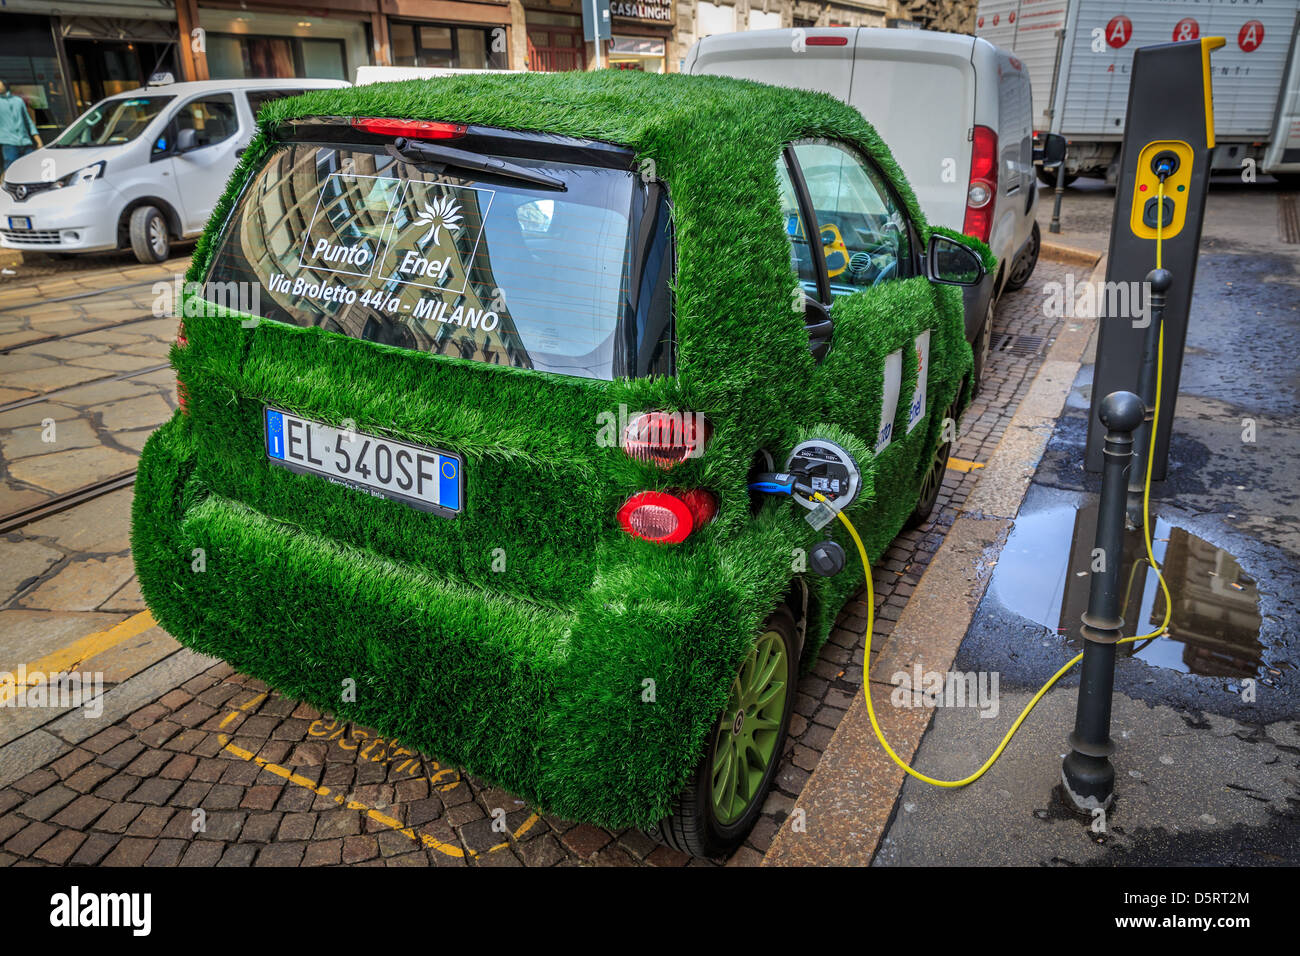 An electric Smart car  with grass cover and  Punto Enel markings, Milan, Italy Stock Photo